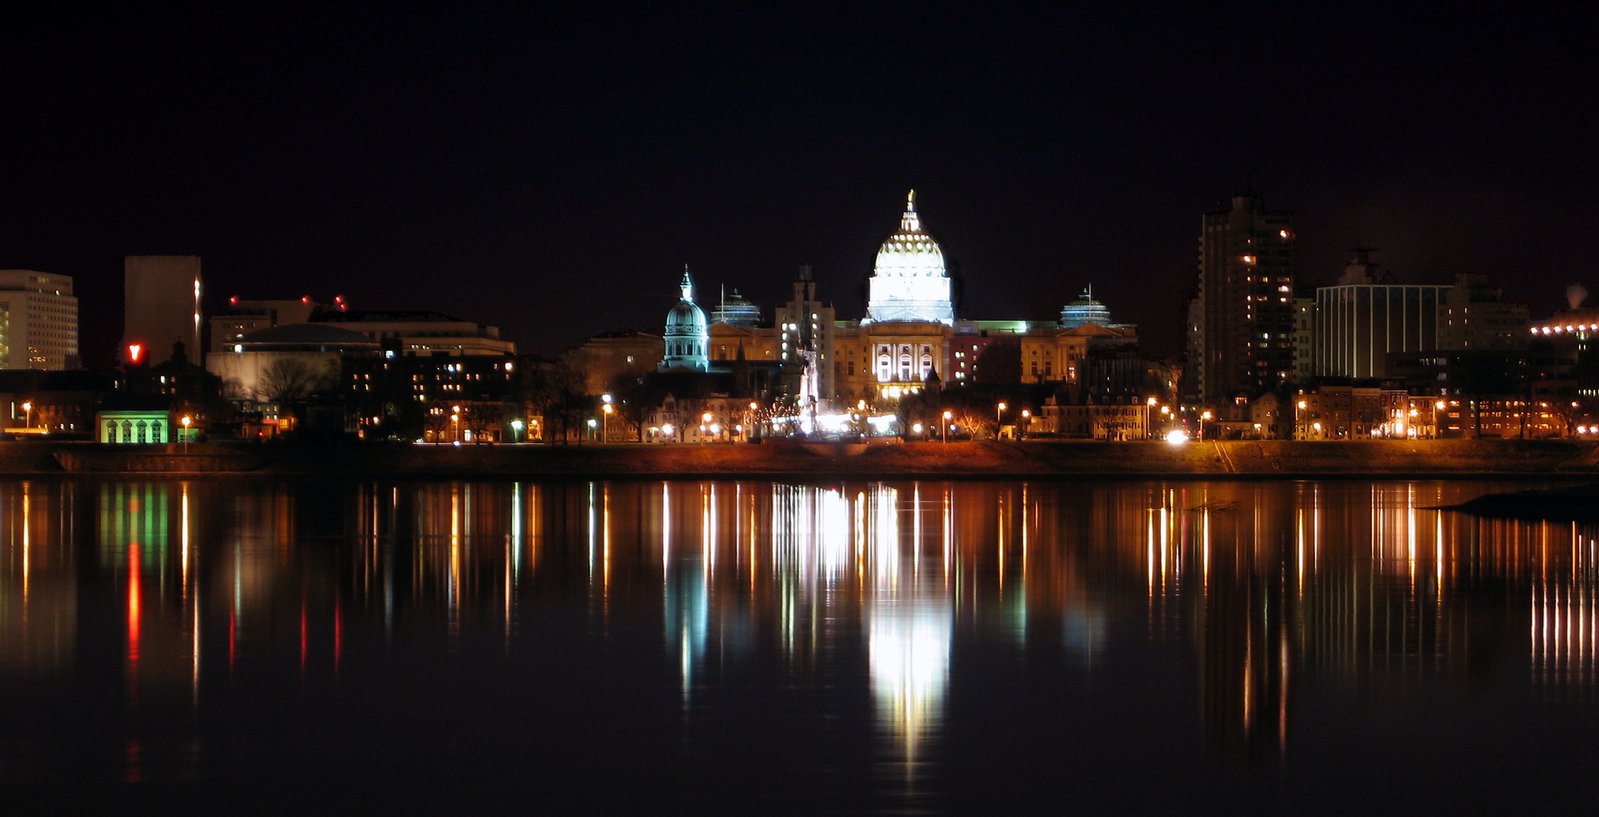 a view of a city across a large body of water at night